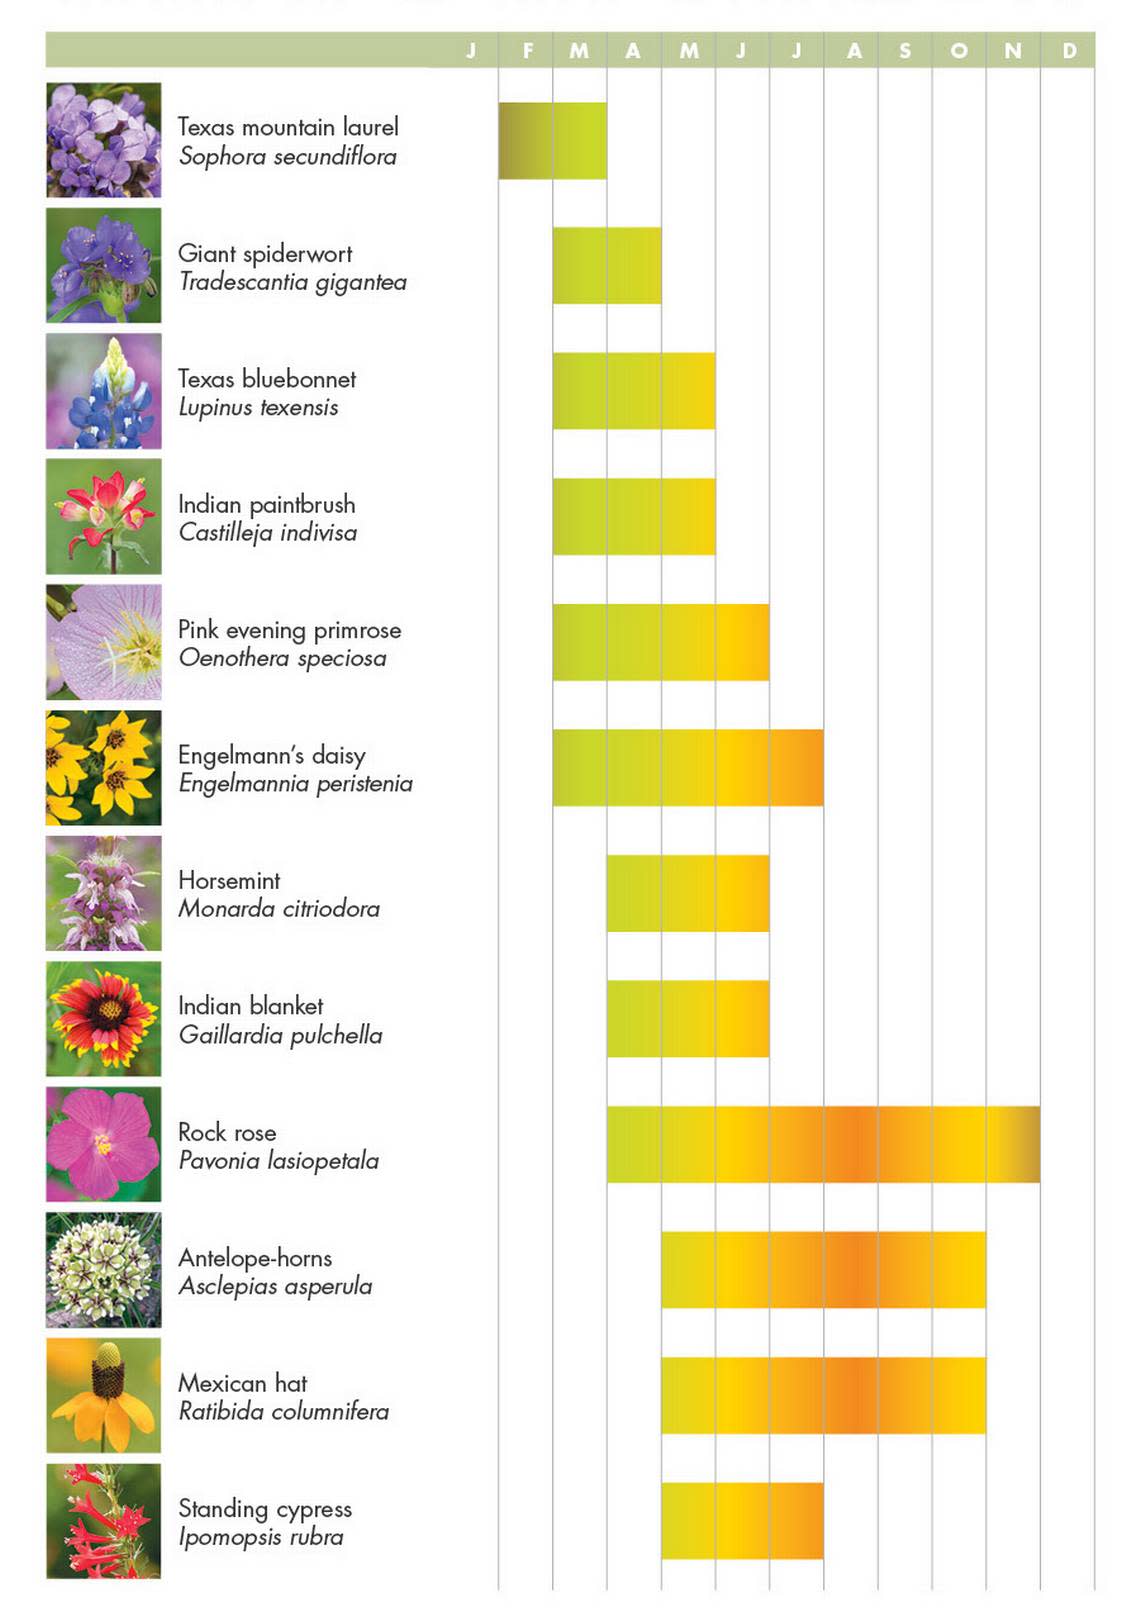 Here’s when Texas wildflowers typically bloom.